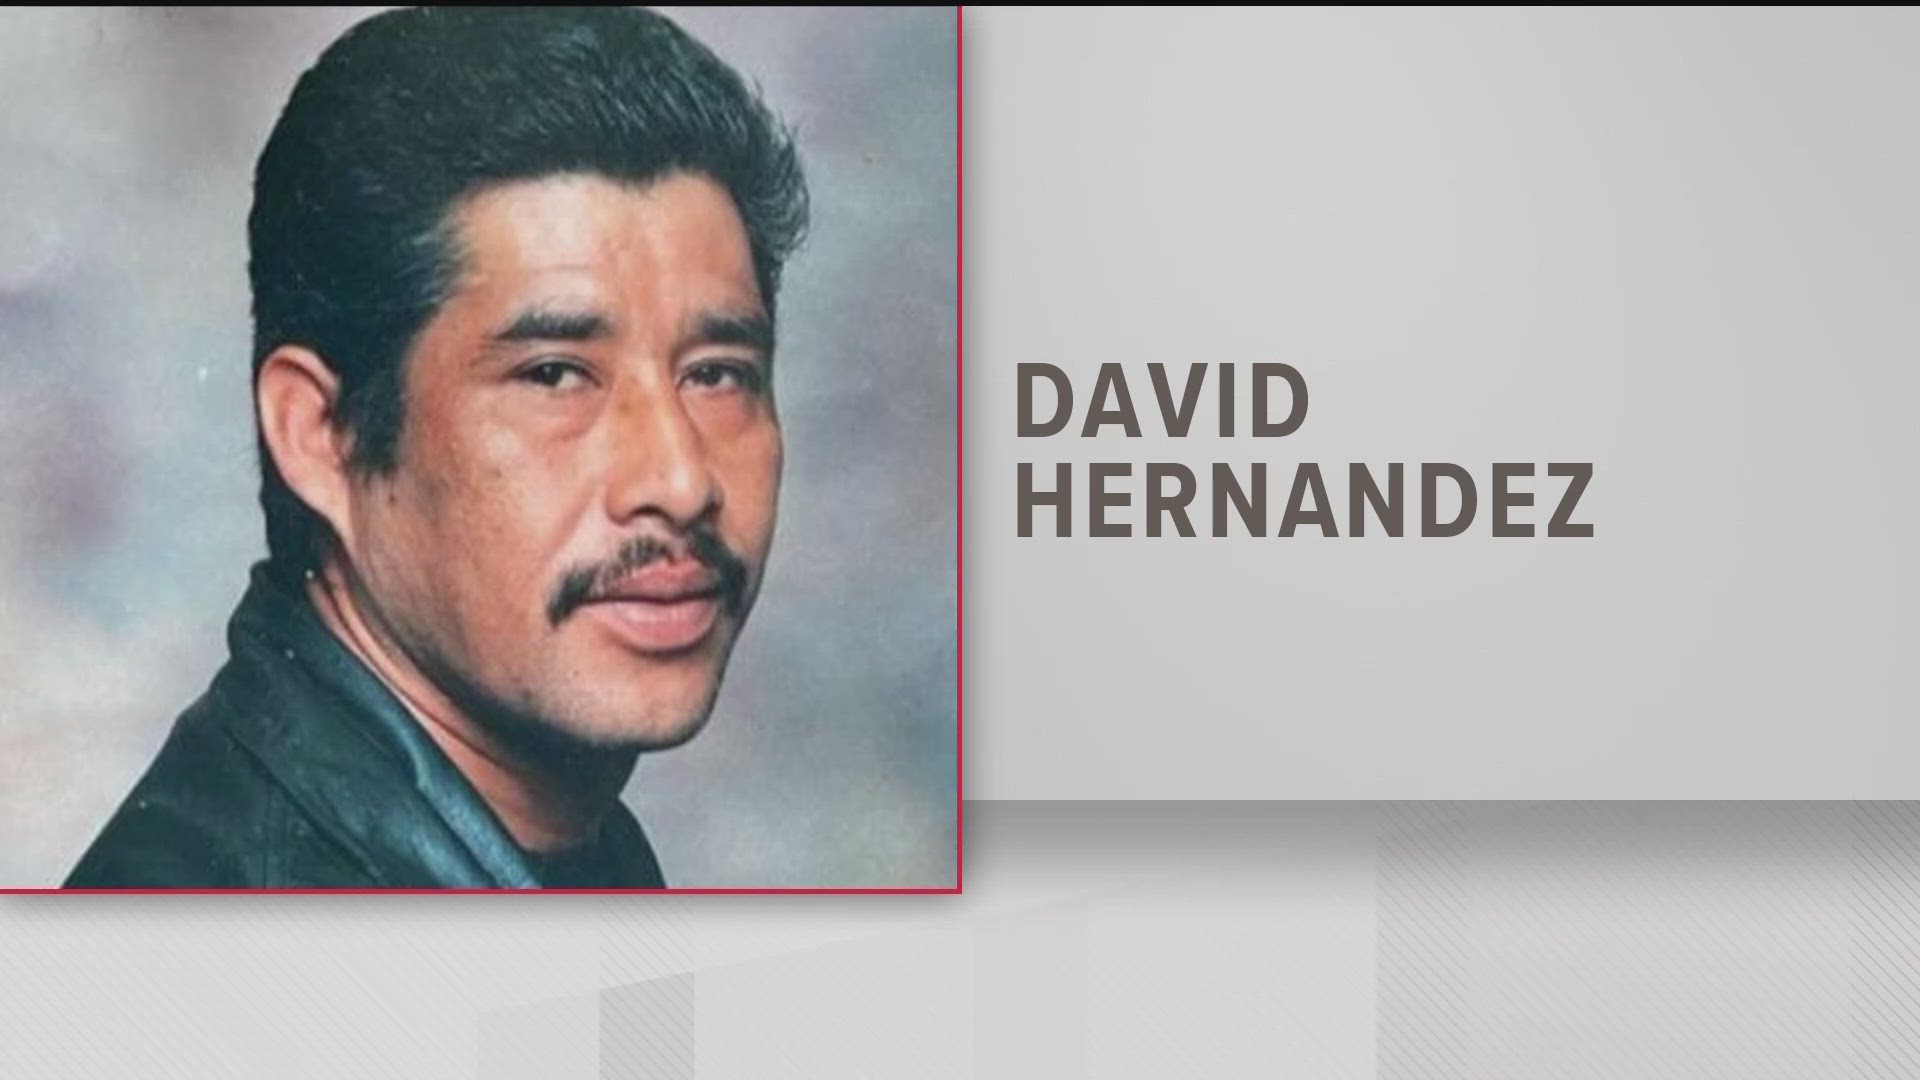 The family says the employer declined to call 911 until David Hernandez stopped breathing.